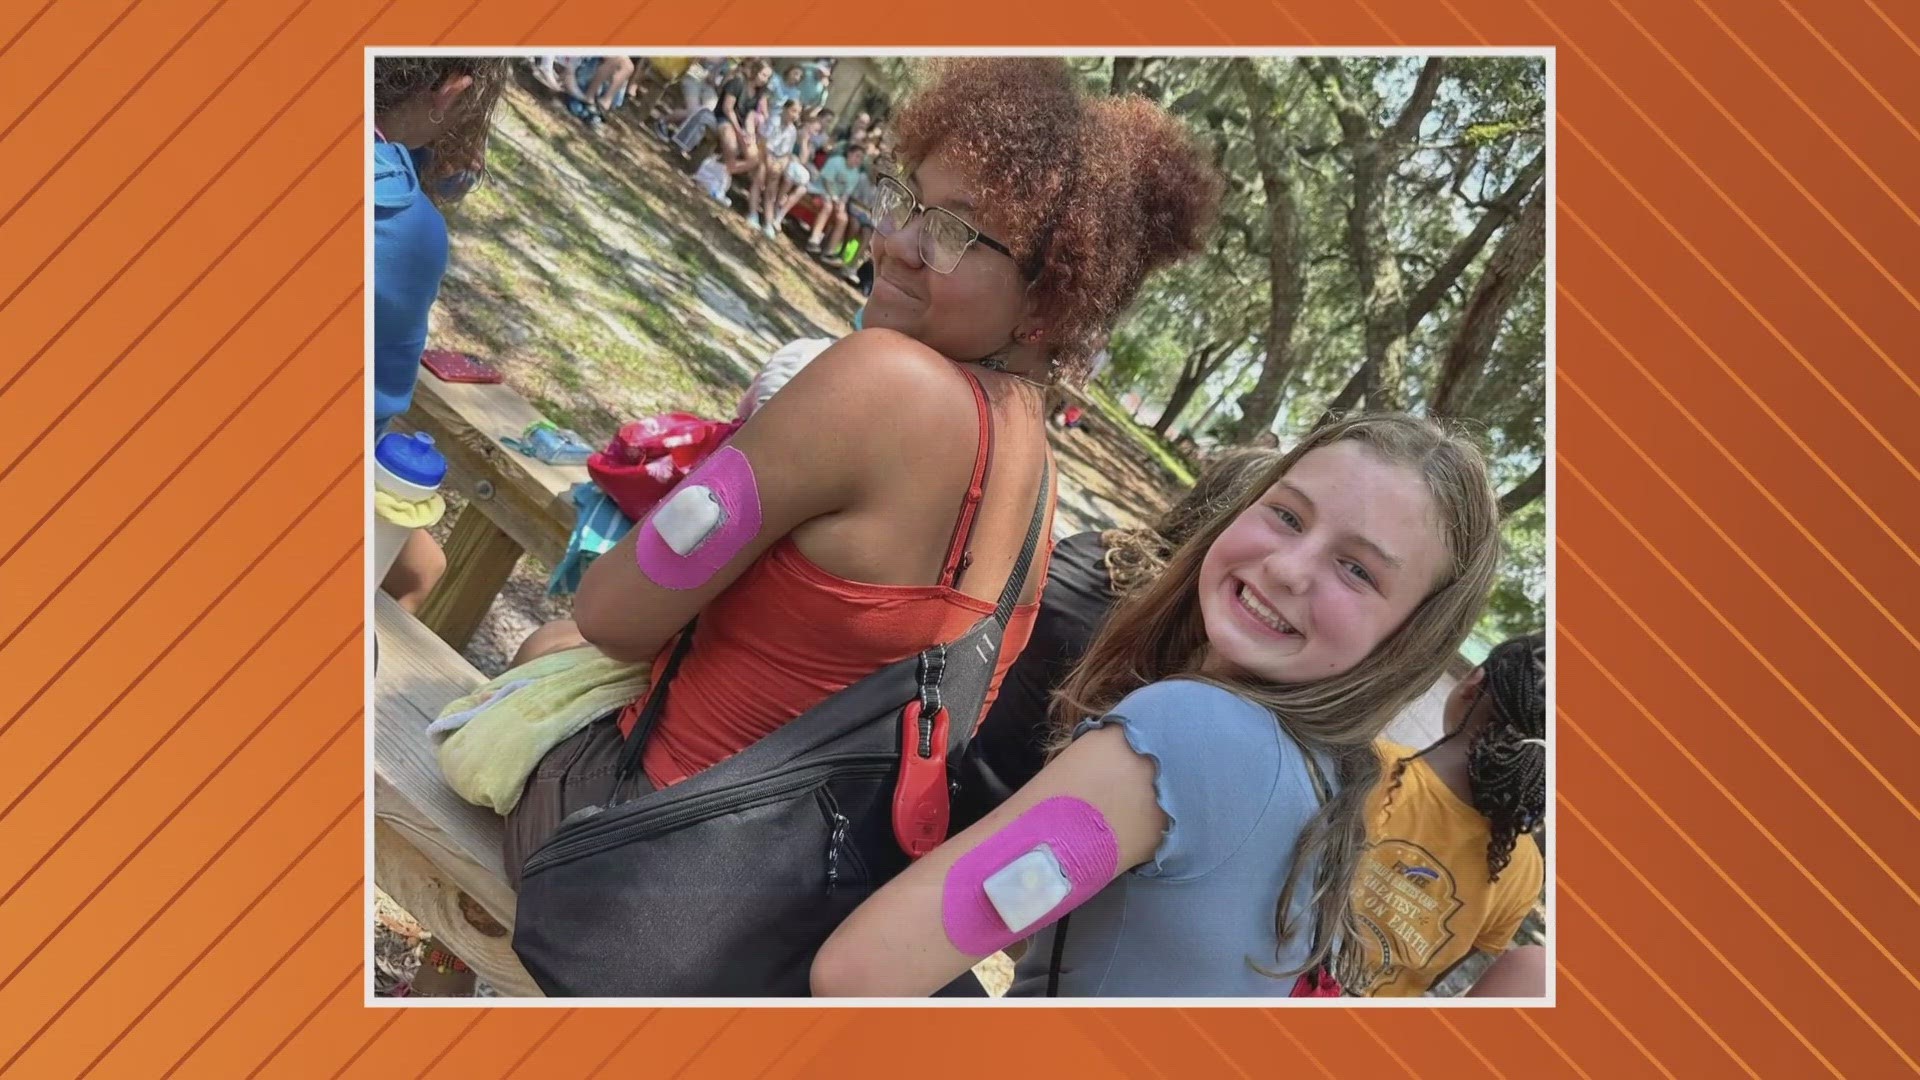 There are several activities the camp offers including playing sports, archery and swimming. For more information on Florida Diabetes Camp, visit here: